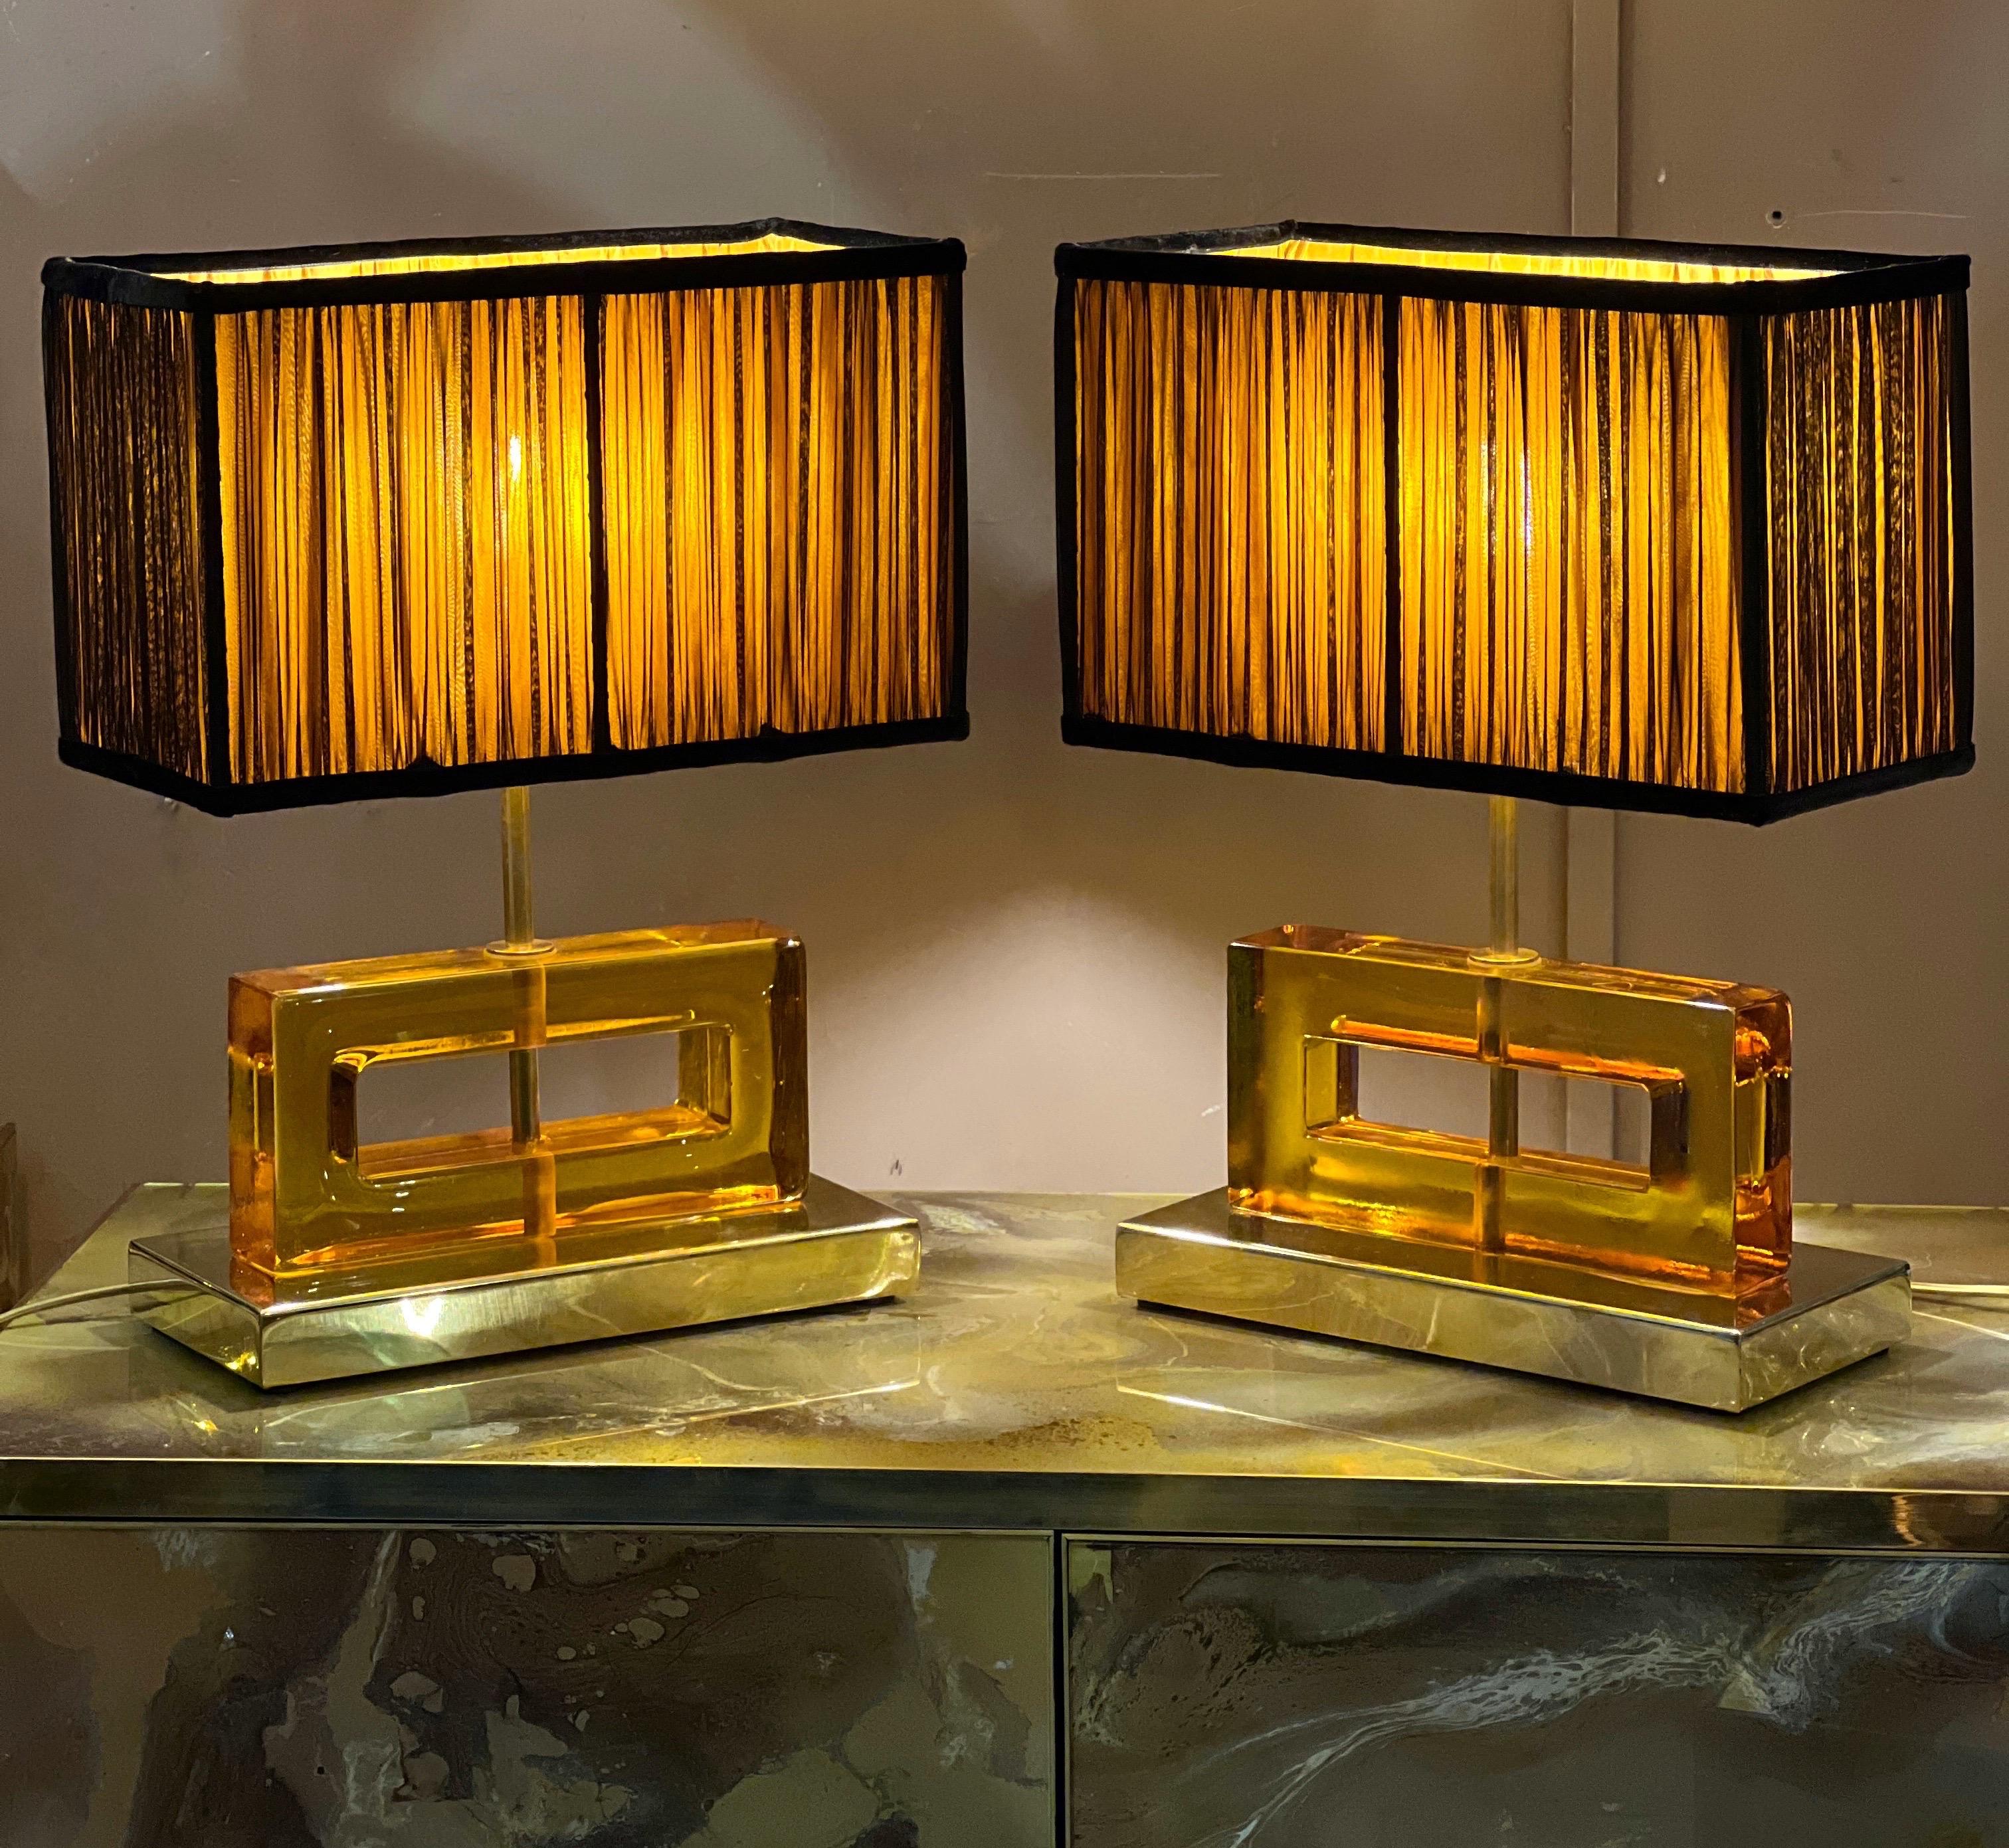 Amber color Murano glass blocks lamps with brass base and our hand sewn yellow and black lampshades.
The geometric glass blocks are solid, thick and heavy.
The double color lampshades are handmade in our internal laboratory using ruffled double